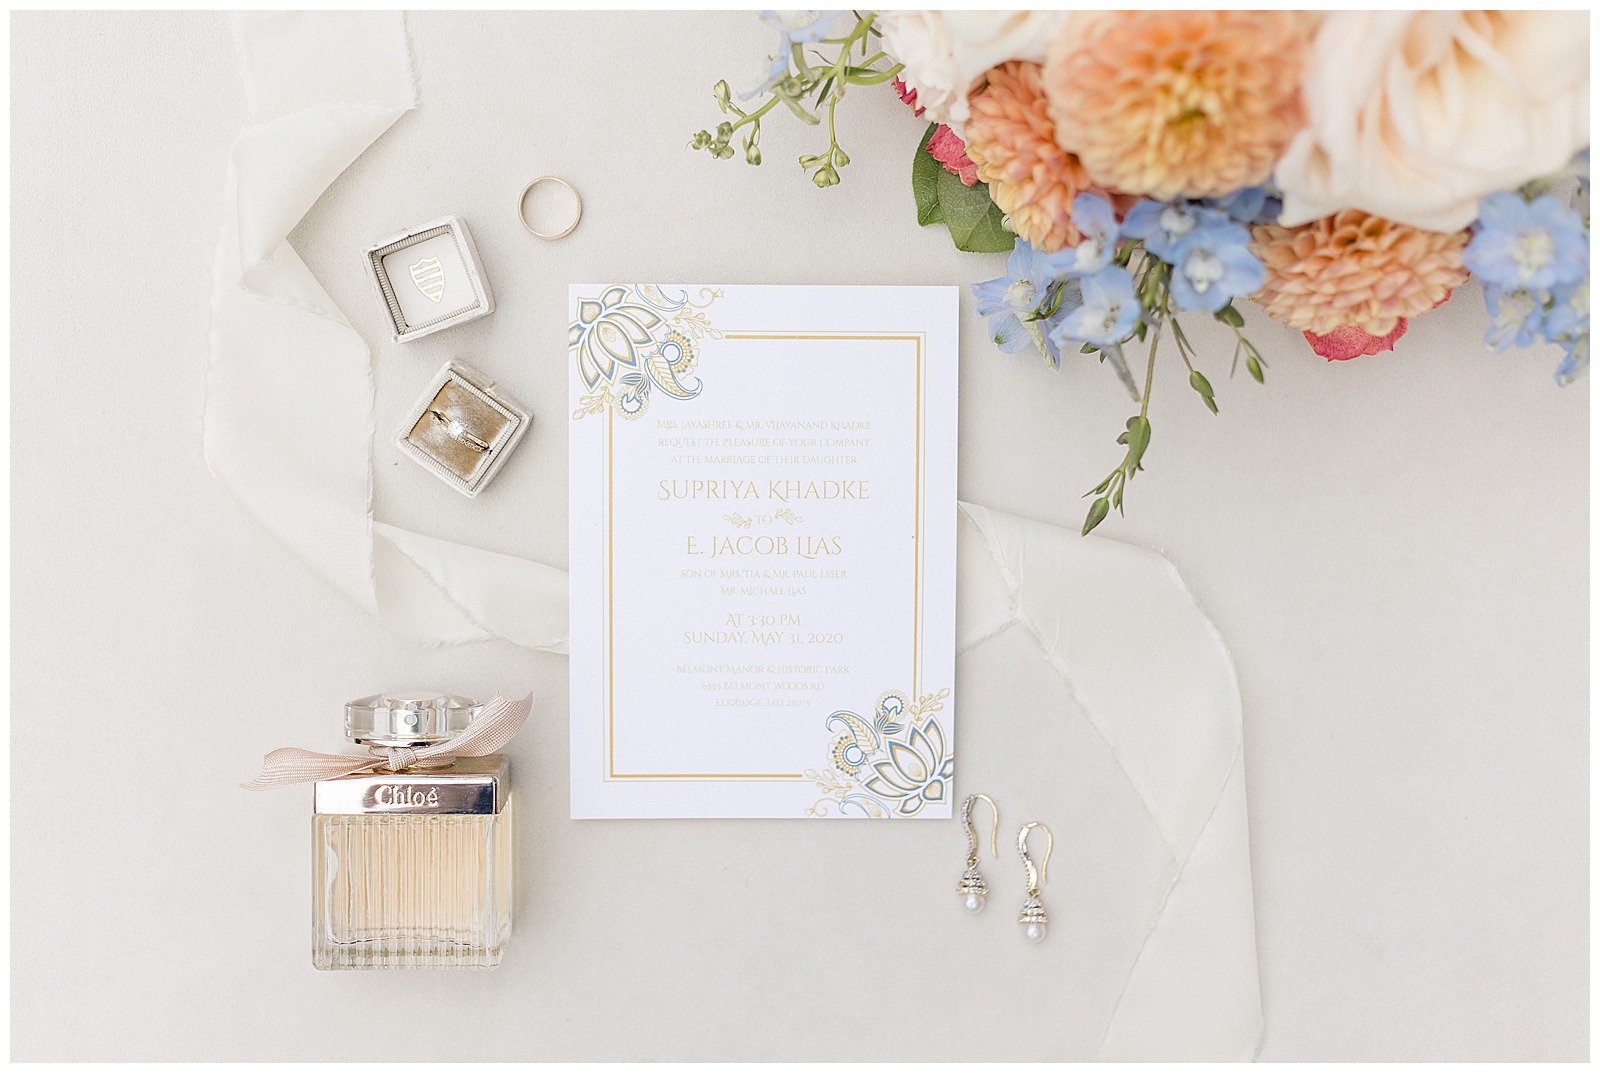 wedding invitation surrounded by vibrant orange and blue flowers and wedding rings and perfume bottle